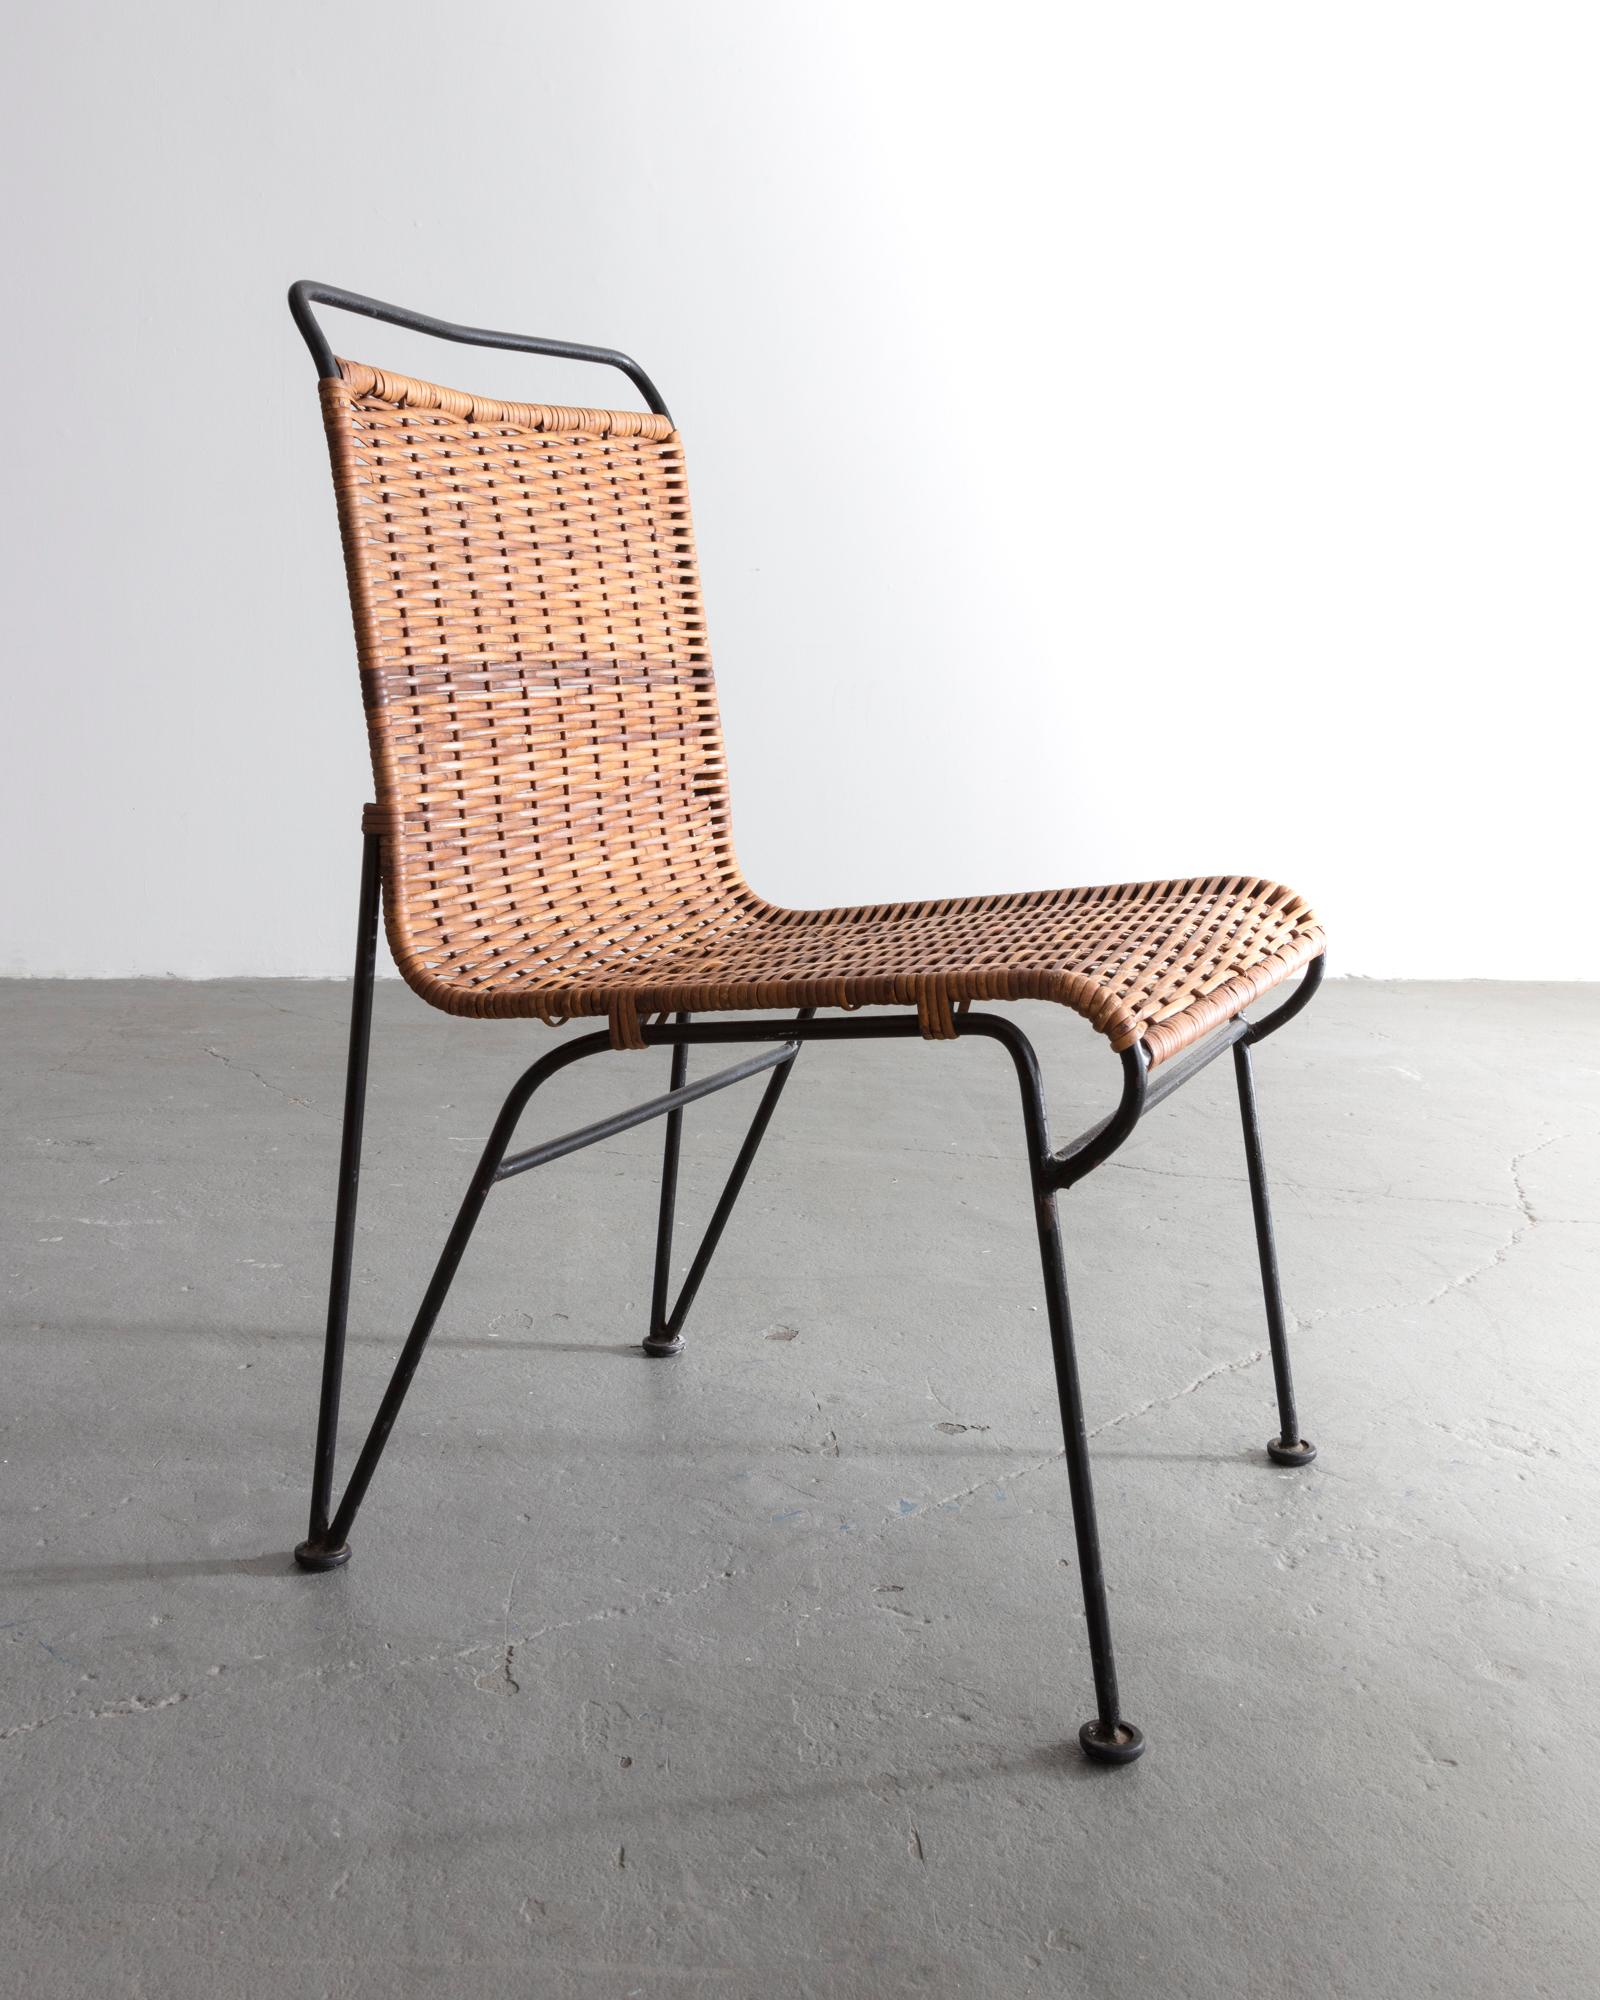 Sol-Air chair with wrought iron frame and original caned seat. Designed by Pipsan Saarinen Swanson, produced by Ficks Reed Company, USA, circa 1950. Iron frame, original caning. A chaise lounge from the same series was exhibited in the inaugural